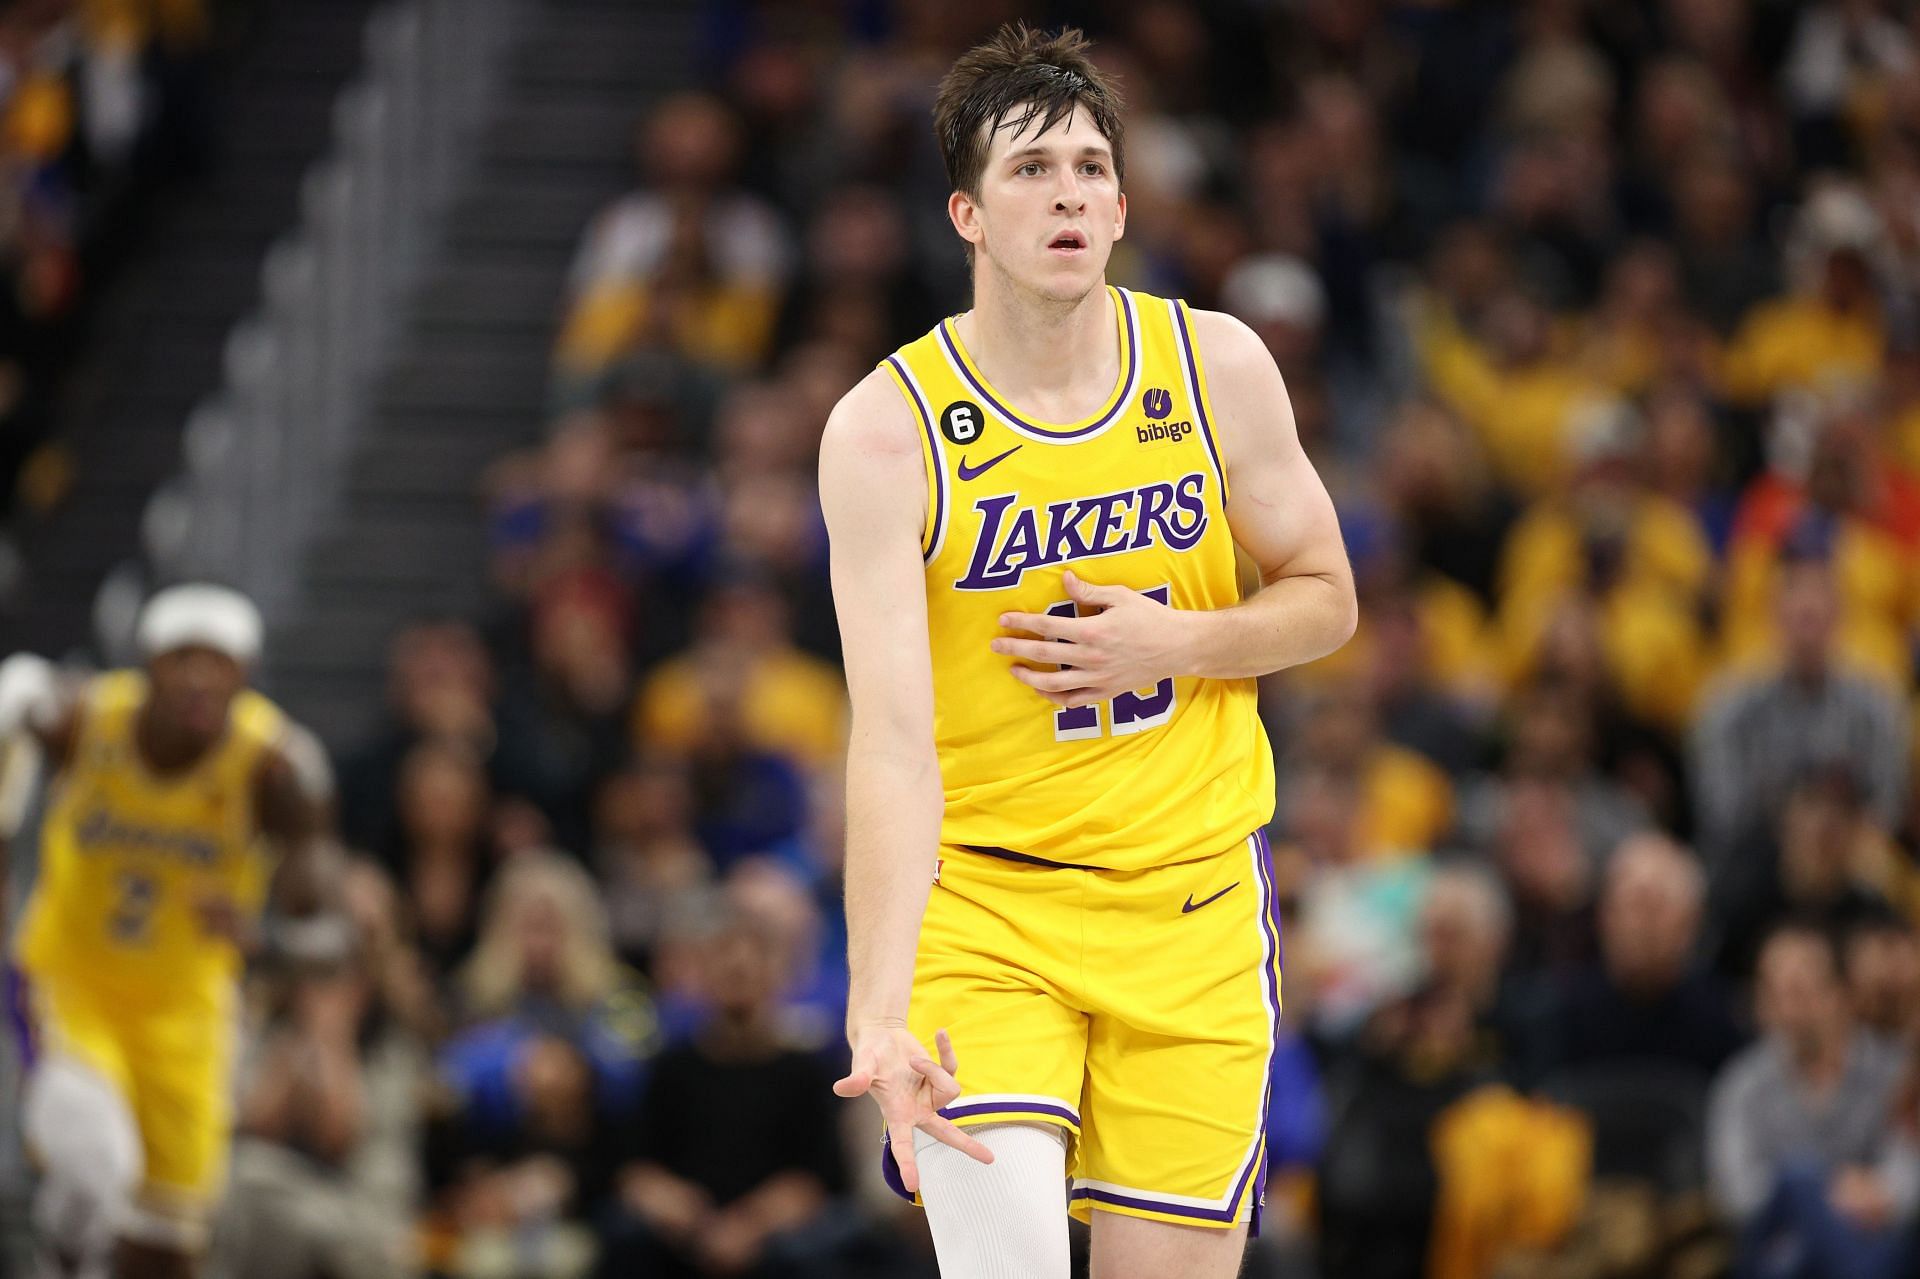 Steve Kerr: Lakers' Austin Reaves Is Emerging As One Of 'Better Young Guys'  In NBA